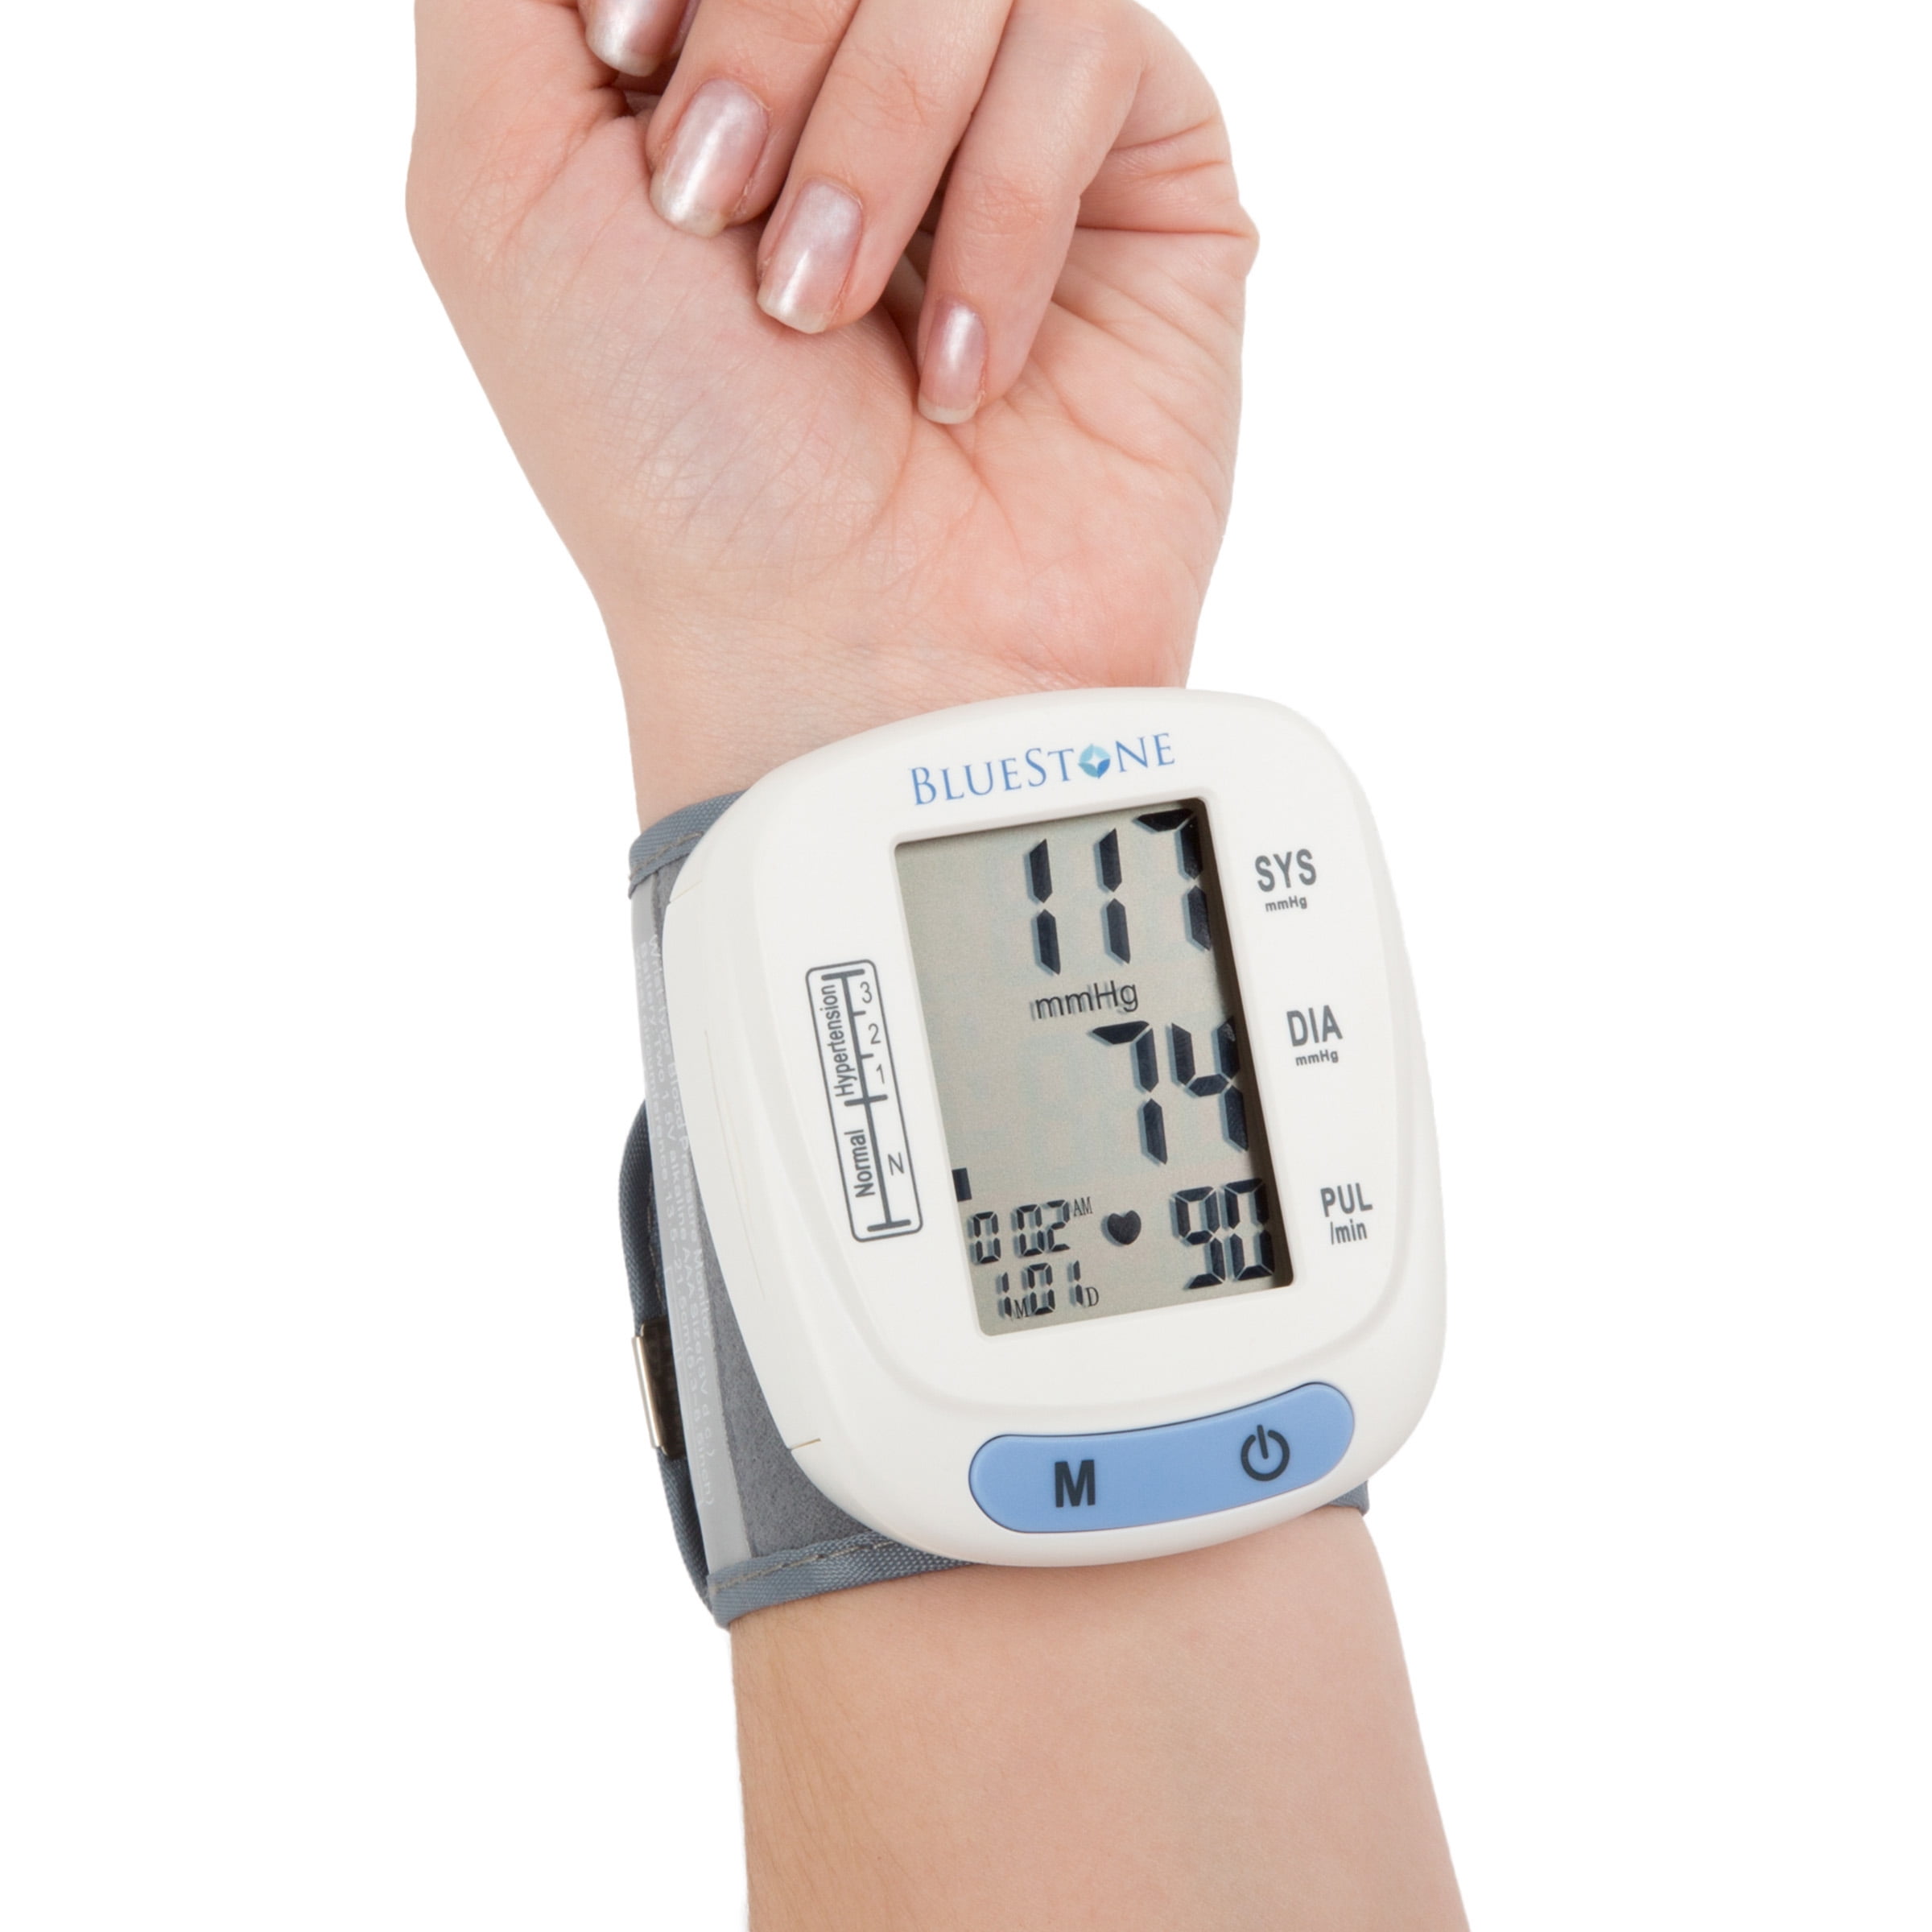 Blood Pressure Monitor With Heart Rate - Automatic Wrist Cuff Blood  Pressure Machine With LCD Display, Memory, and Carrying Case by Bluestone